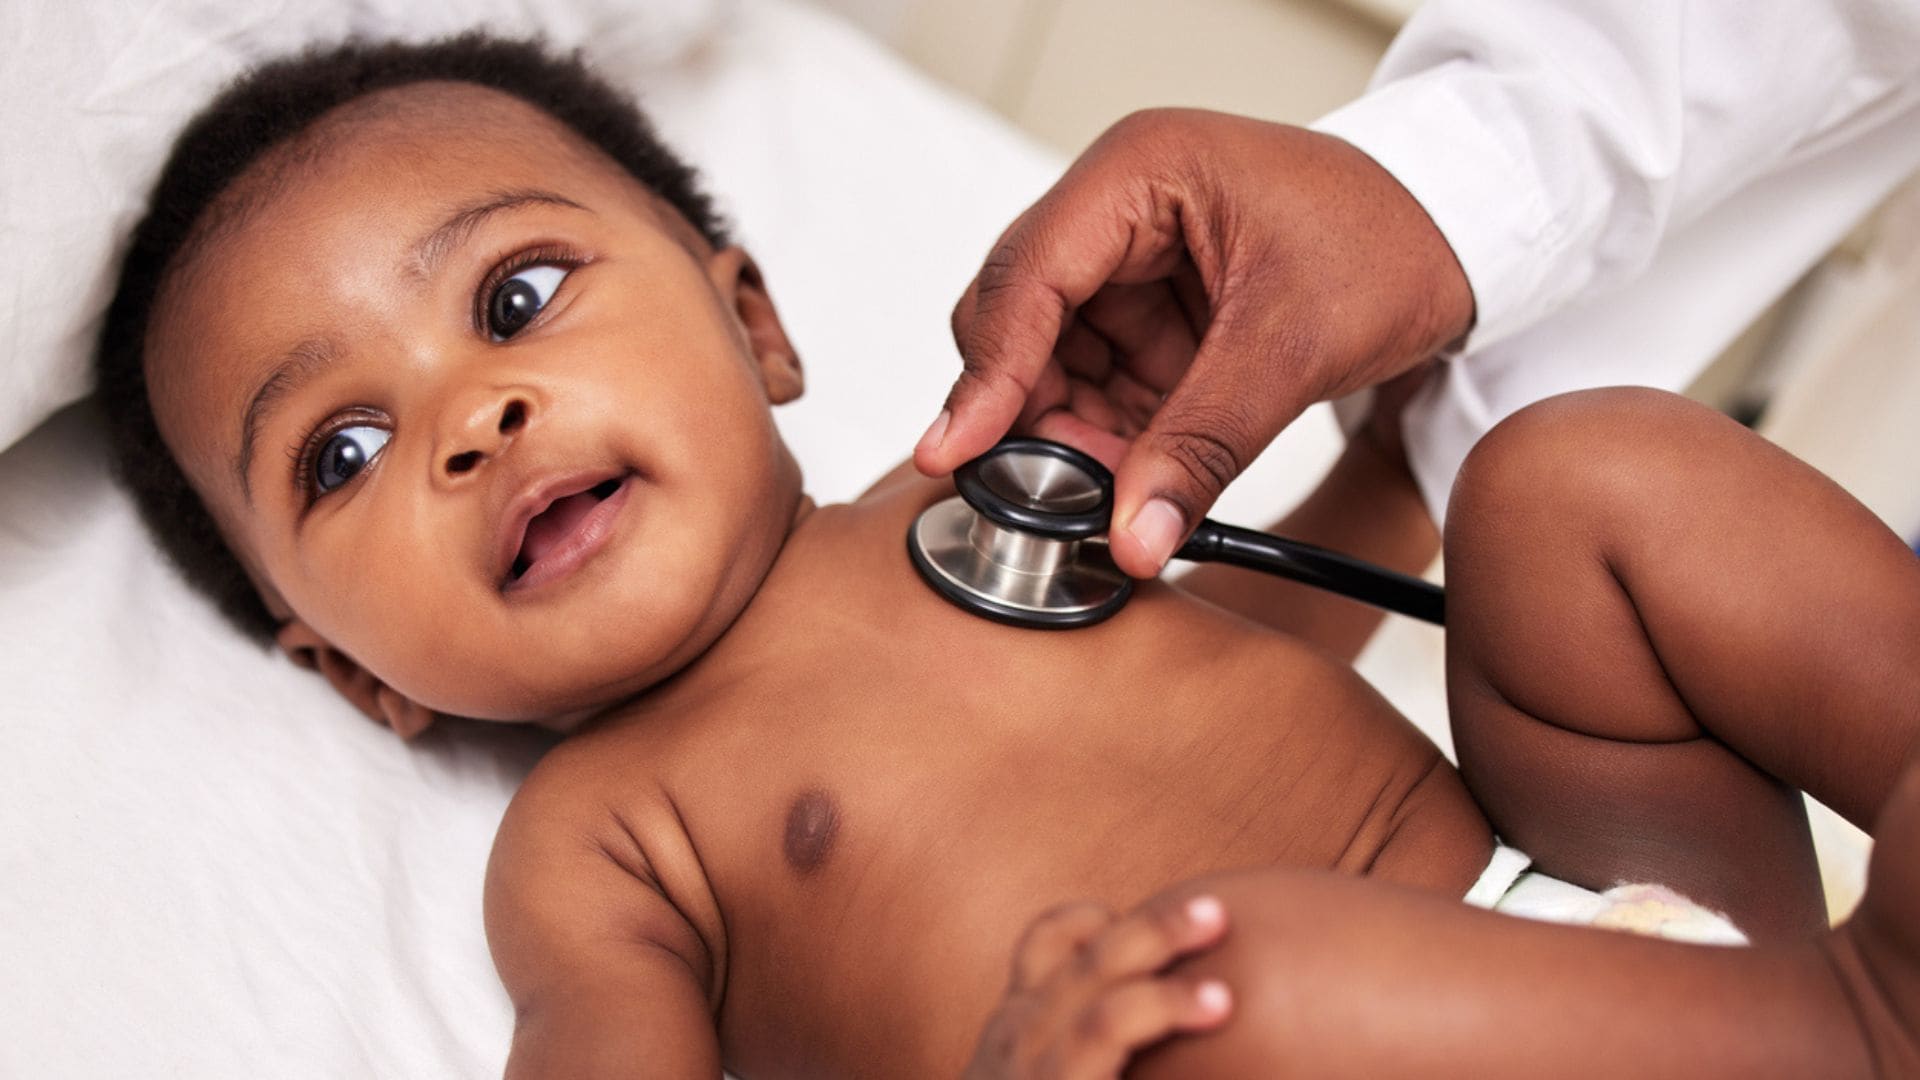 A doctor has a stethoscope on a babies chest